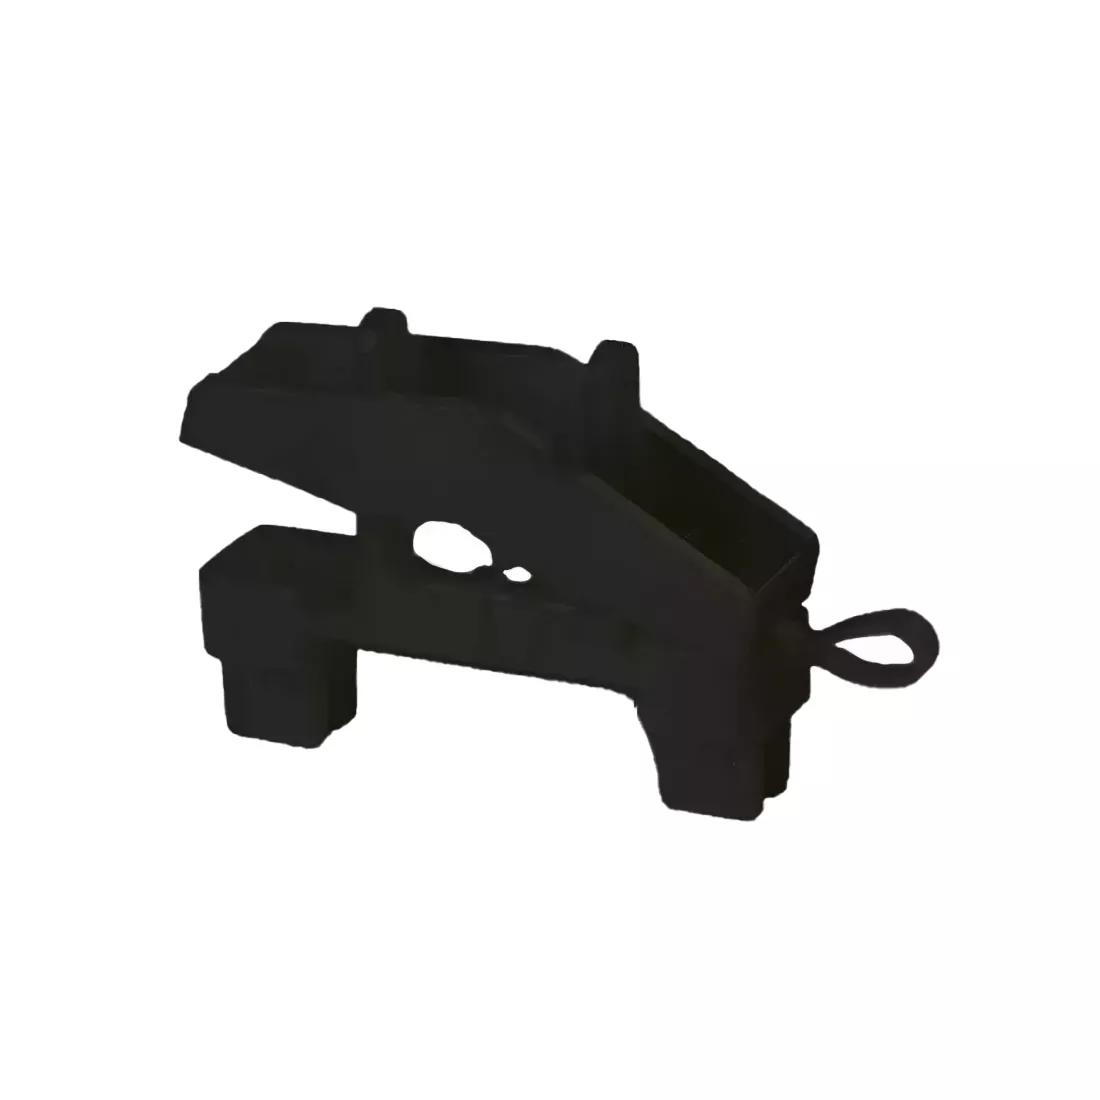 Cable Clamp - Hinged Locking Black Photo1